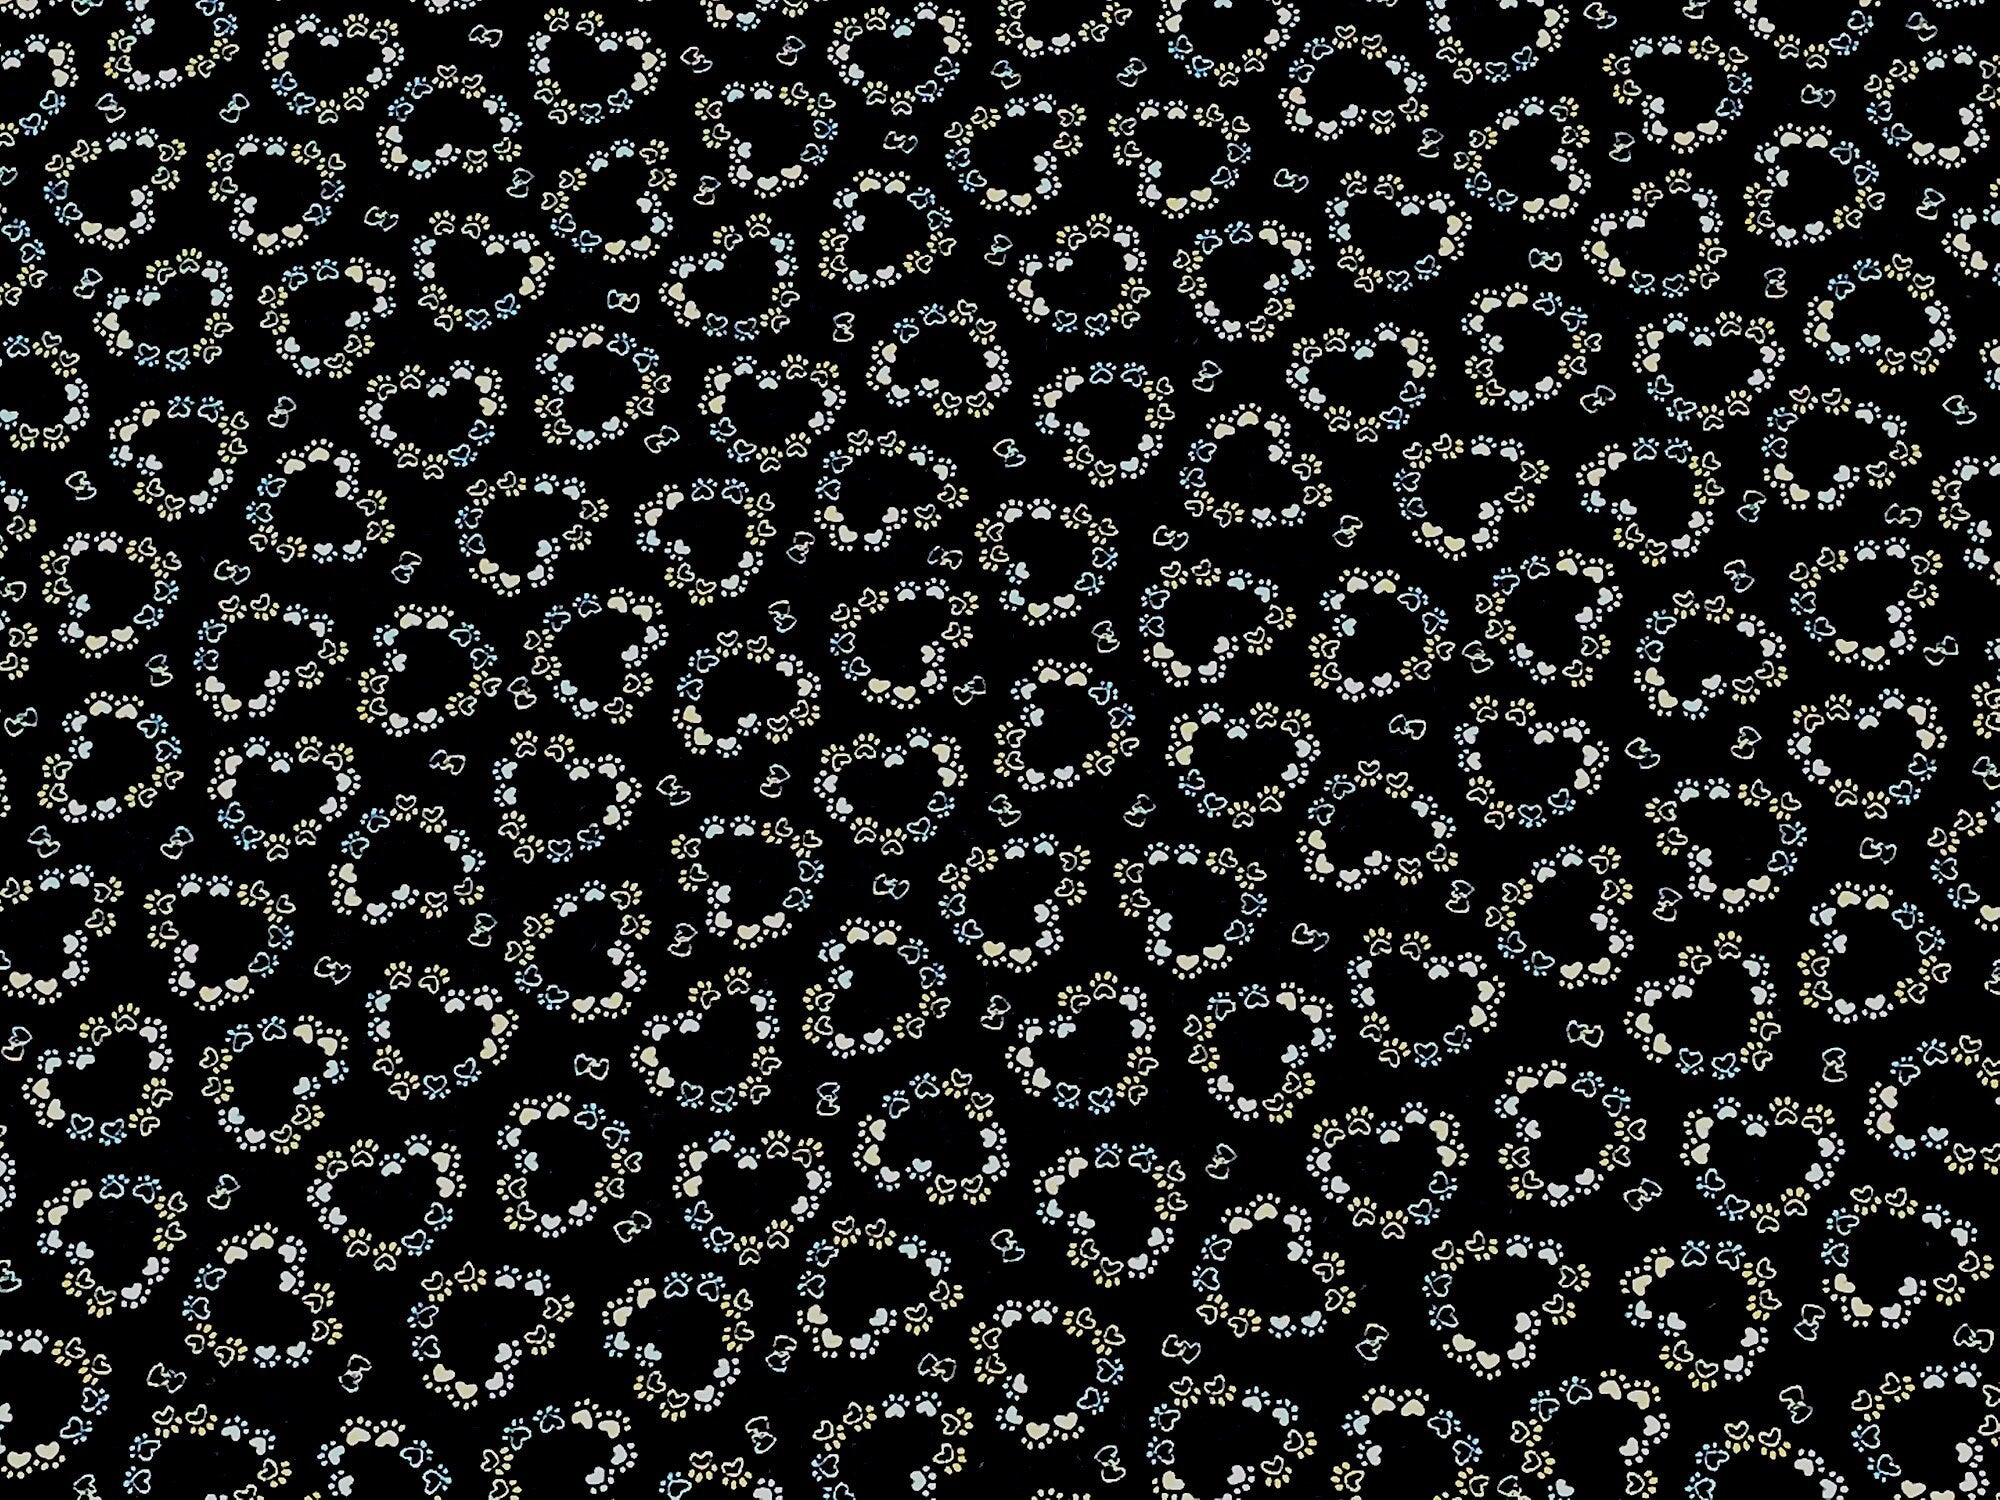 This black fabric is covered with paw prints in a heart shape